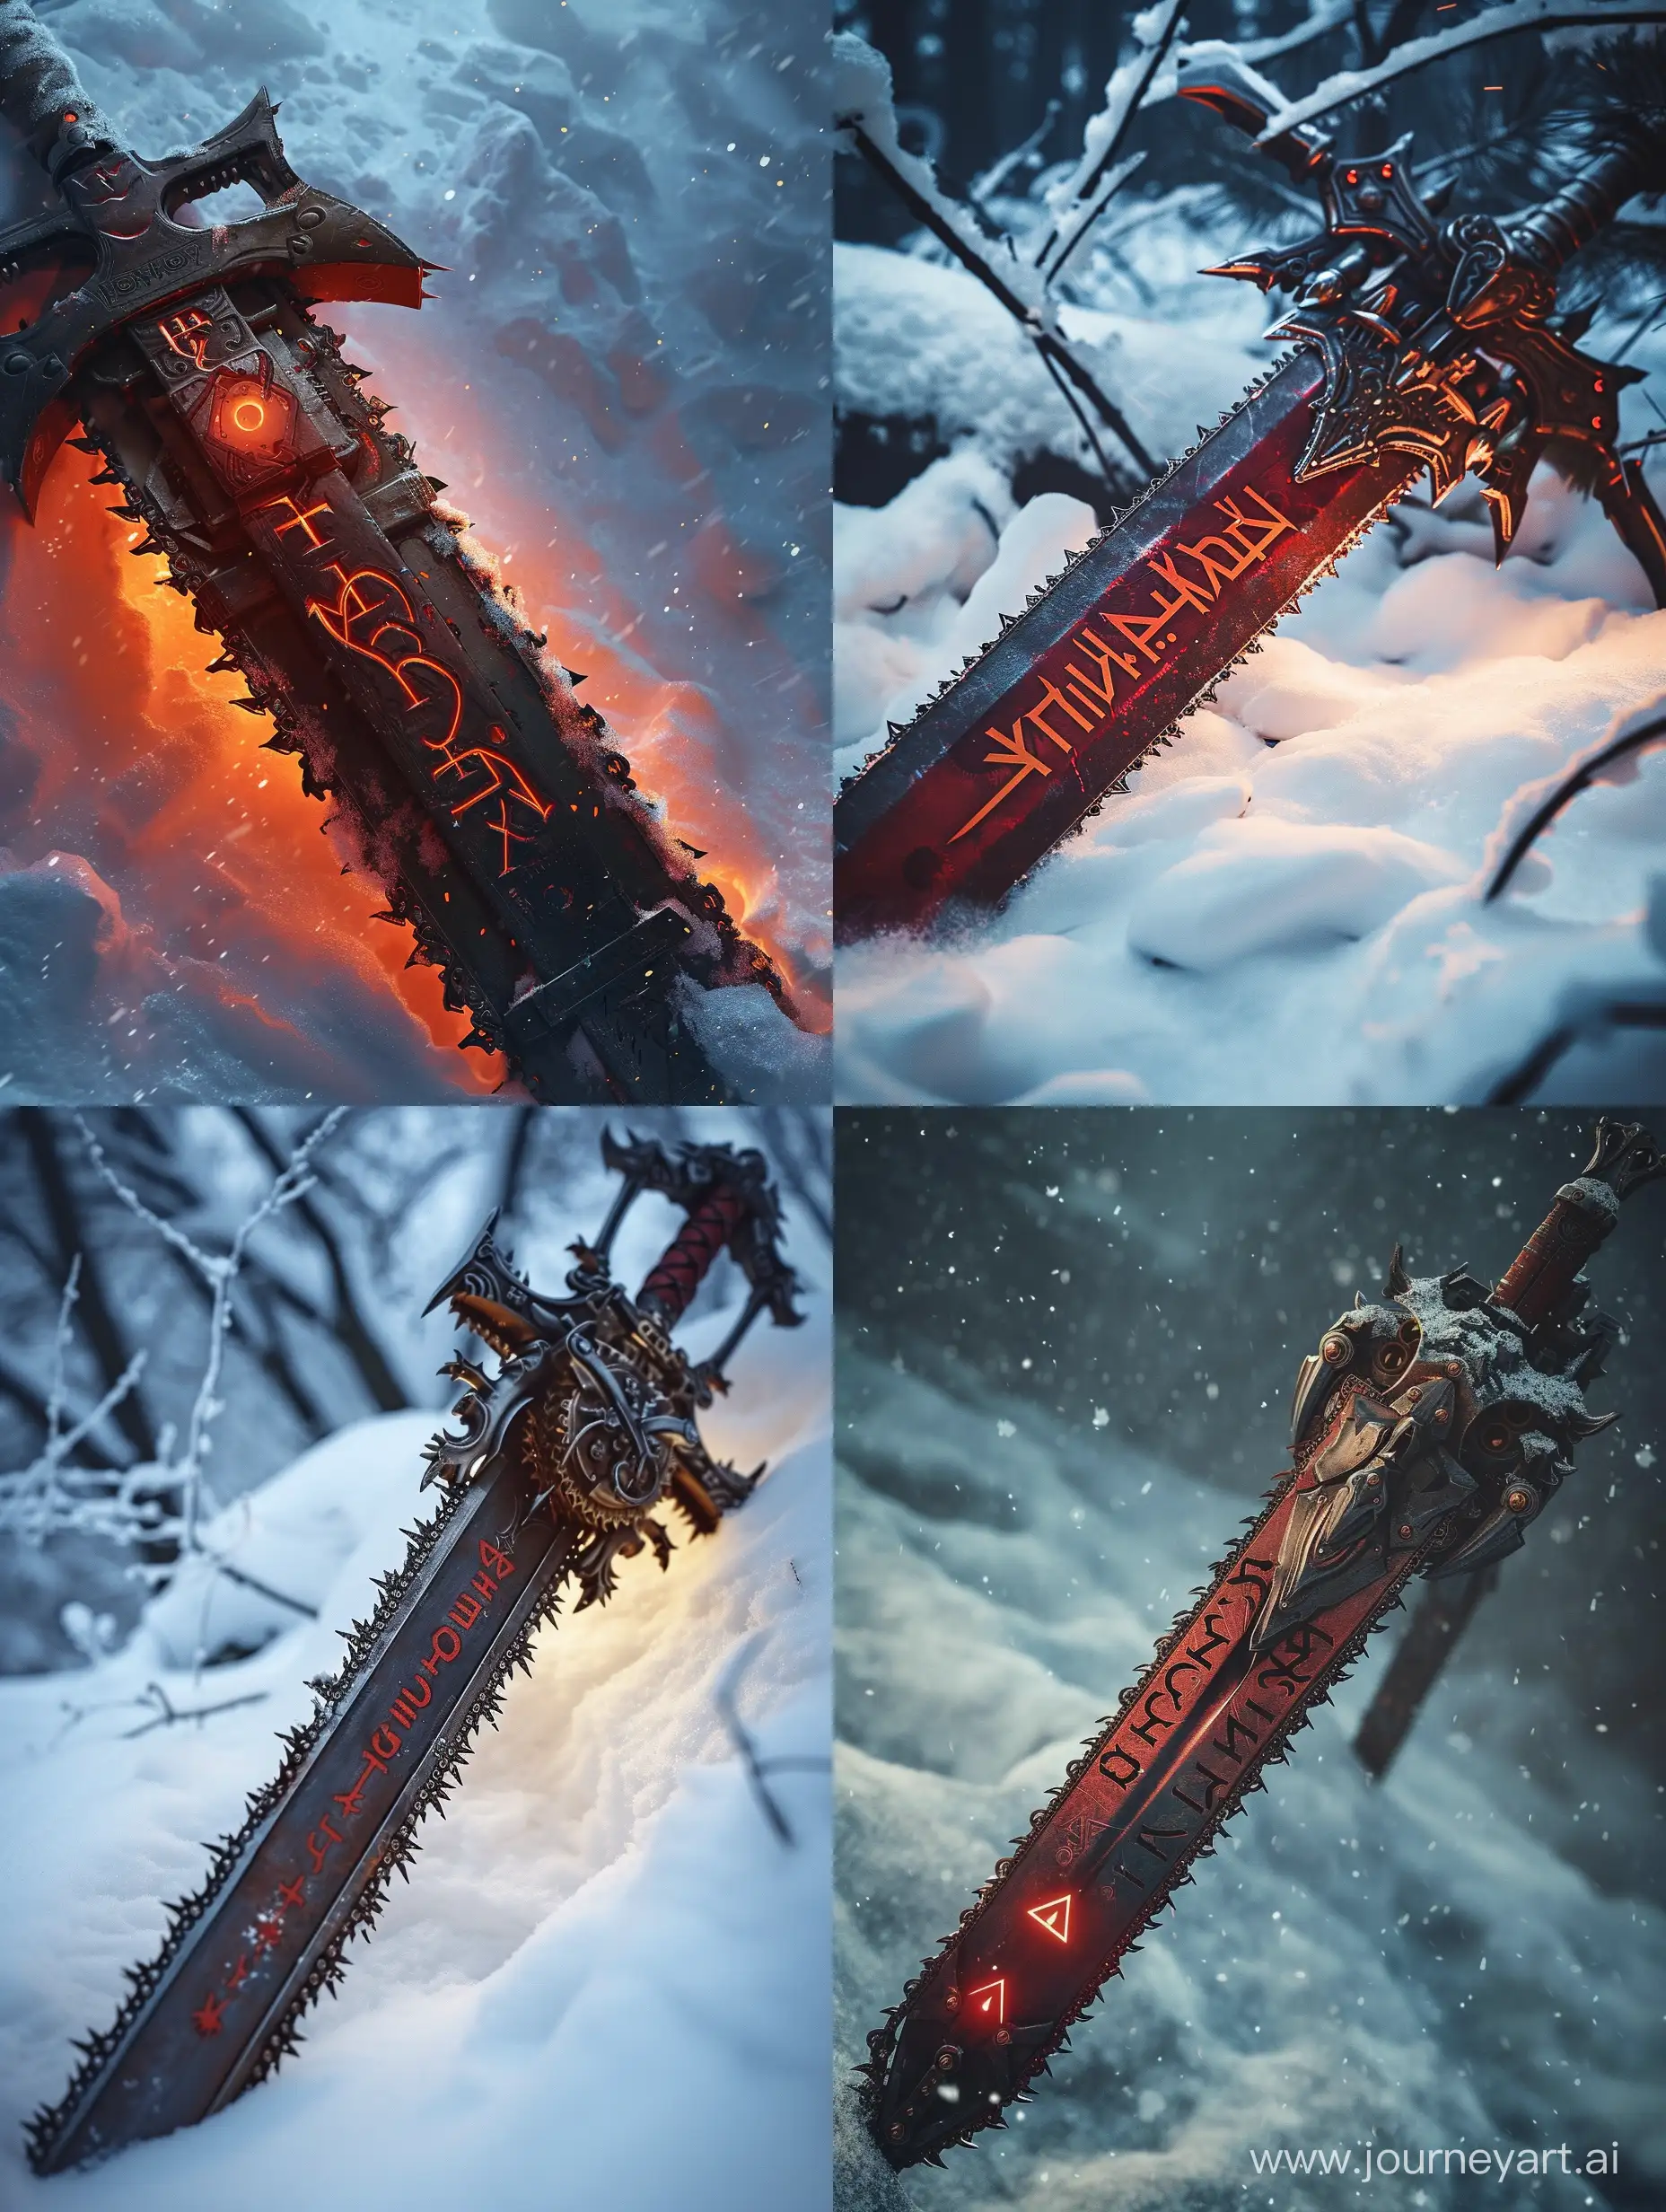 Intricate-Steampunk-Red-Queen-Sword-with-Chainsaw-Blades-in-Snow